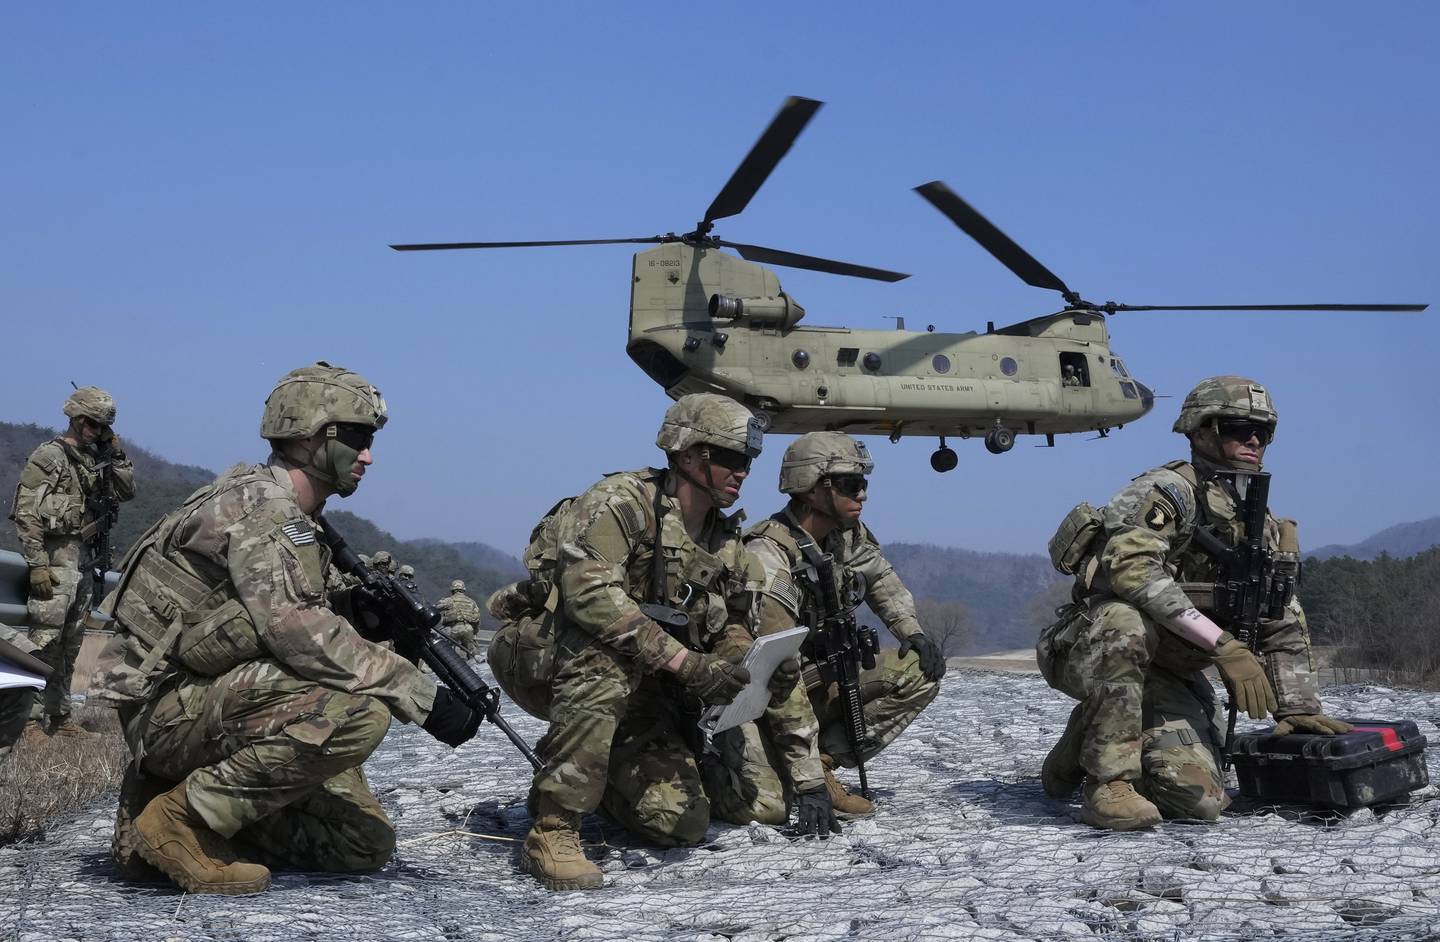 U.S. Army soldiers wait to board their CH-47 Chinook helicopter during a joint military drill between South Korea and the United States at Rodriguez Live Fire Complex in Pocheon, South Korea, Sunday, March 19, 2023.